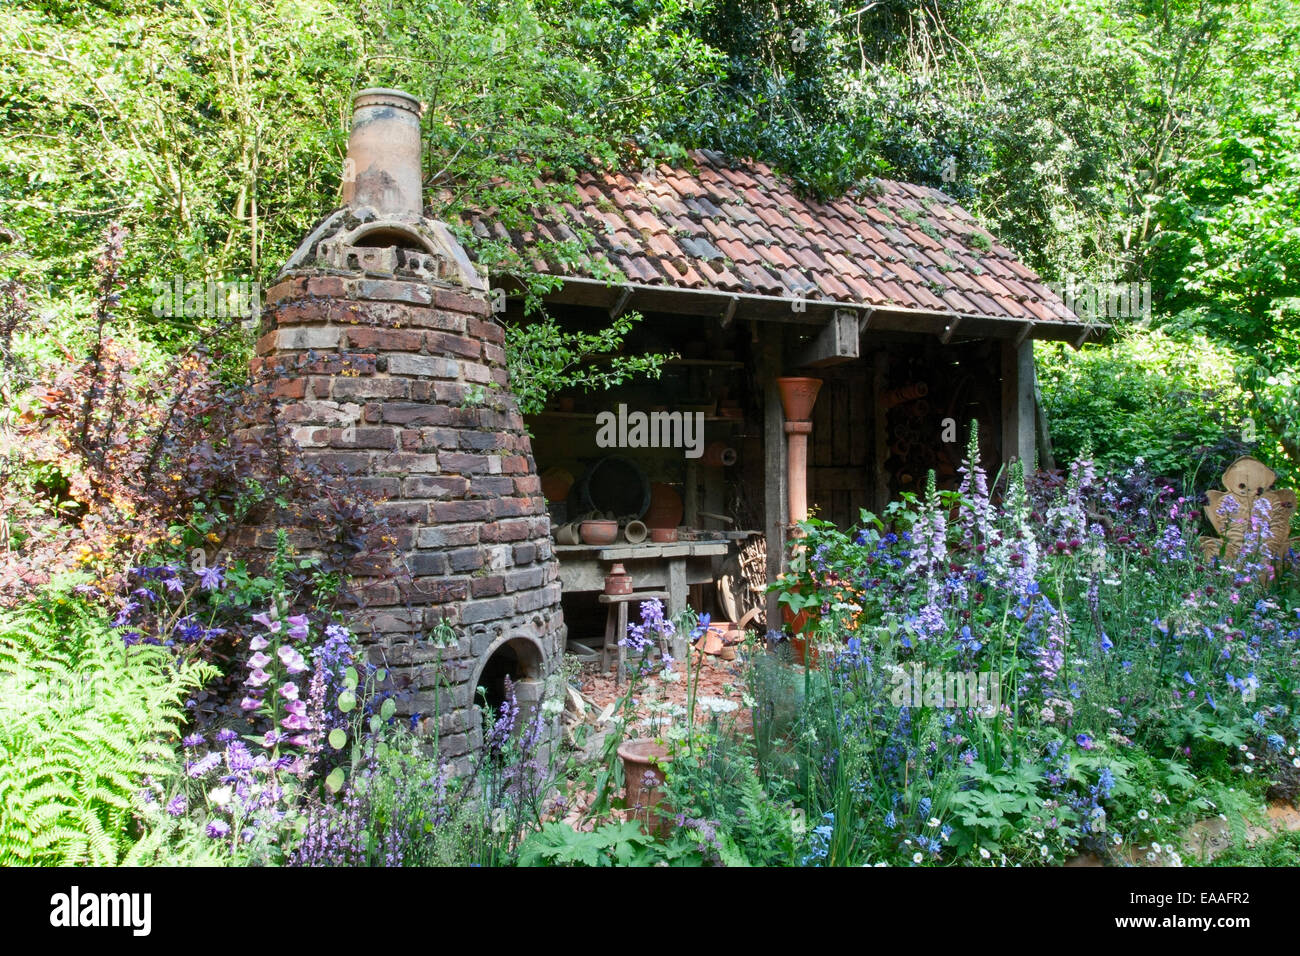 Chelsea Flower Show 2014. An old potting shed with perennial and bulb planting. Brick kiln on the left. Stock Photo